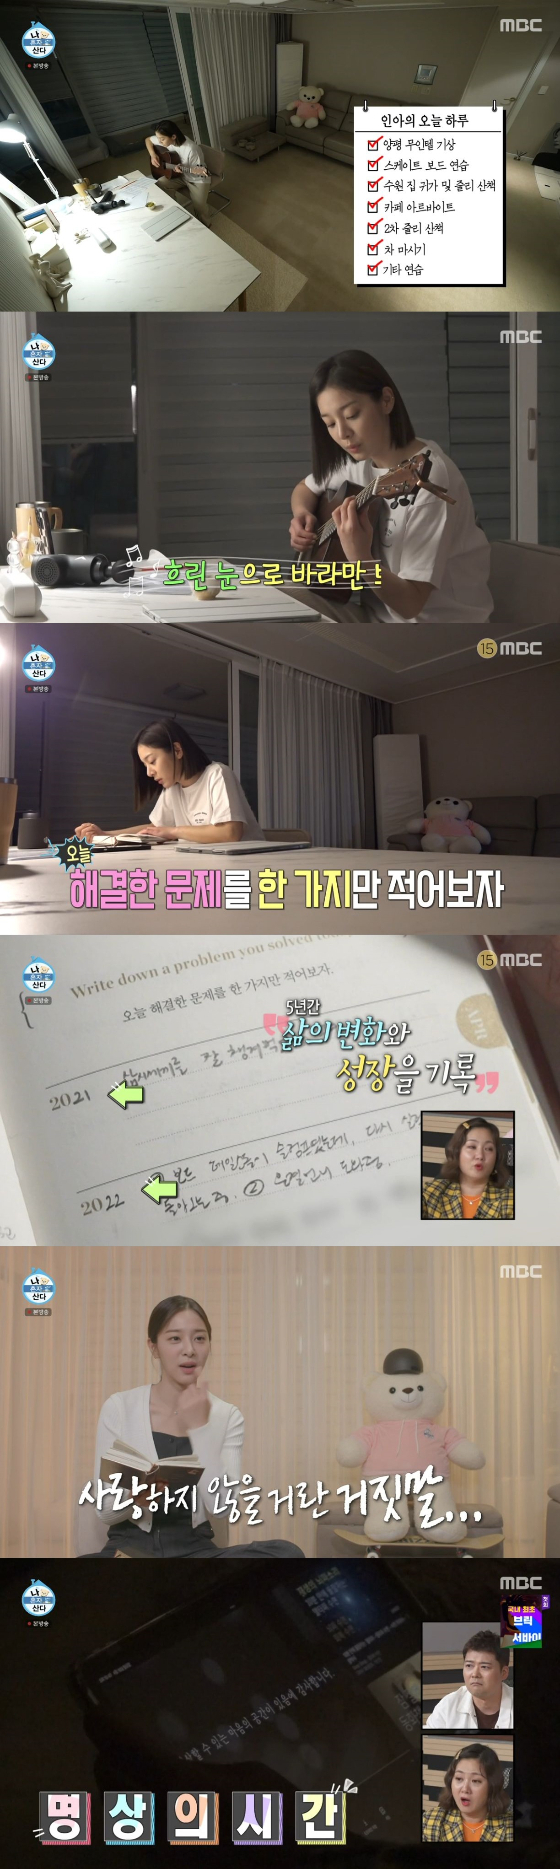 MBC I Live Alone (hereinafter referred to as I Live Alone), which was broadcast on the 29th, featured actor Seol In-ah, a Loco Goddess actress.On the same day, Sul In-ah drank tea before falling asleep and then took out a score. Then he started playing with the guitar.Then he pulled out the QnA diary, saying, There are many fun questions, and What is the biggest lie I have ever done? Seol In-ah said, I will not love anymore.I have never loved it before. I am a lie that I promised. He laughed and laughed at himself, saying, Oh, come on. I write three diary, said Seol In-ah. QnA, Haru diary, write down the memo in my life.Washing and lying on the bed, Sul In-ah played the time of meditation Iran video, with Jun Hyon-moo shouting: Please get some sleep, there are so many routines.Kian84 also said, Please sleep, and Park Na-rae agreed, Is this all the day off now? Kee laughed, saying, It would be better if I didnt rest.Earlier, after he had been up at the Uintel the night before, he practiced at a skateboard in Yangpyeong, and then came home to Suwon to walk his dog Julie.After a walk, I worked part-time at the cafe and took a walk to Julie. I came home and continued my guitar practice.Then, after wearing the safety device, he started to ride the board against the slopes. When the representatives rocktoo was successful, everyone admired it.When the failure of tailIran technology was seen as a VCR, Sul In-ah said, Thats a harder technique than it looks, and Jun Hyon-moo replied, It looks difficult.However, Seol In-ah eventually succeeded in the tail stall in succession and was applauded by the cast. Code Kunst admired it as a real youth drama.